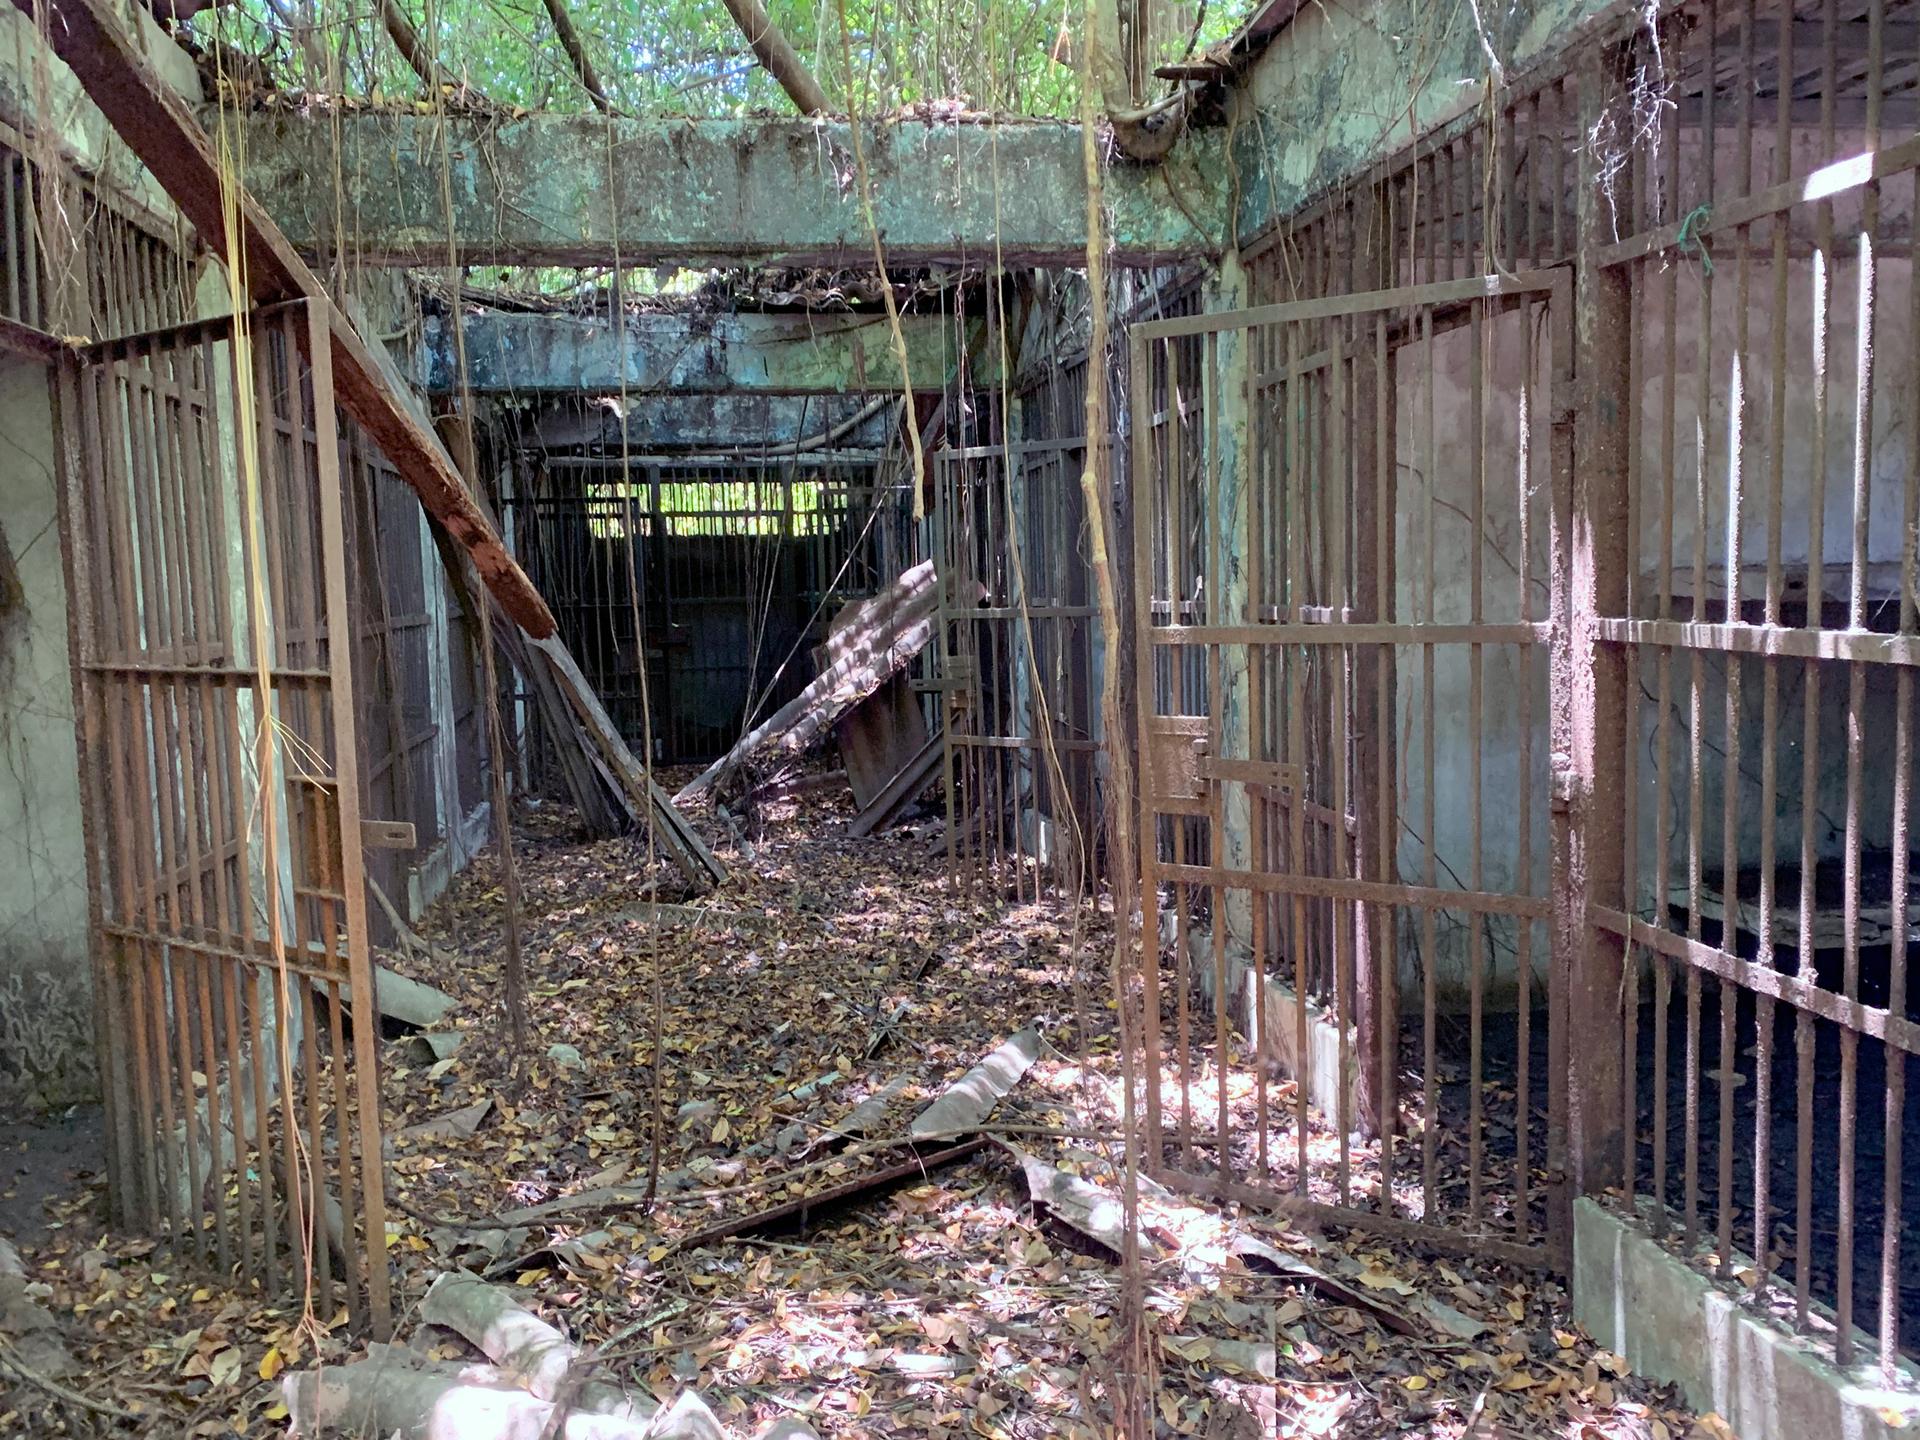 A former prison is covered in vines and the metal bars have rusted over